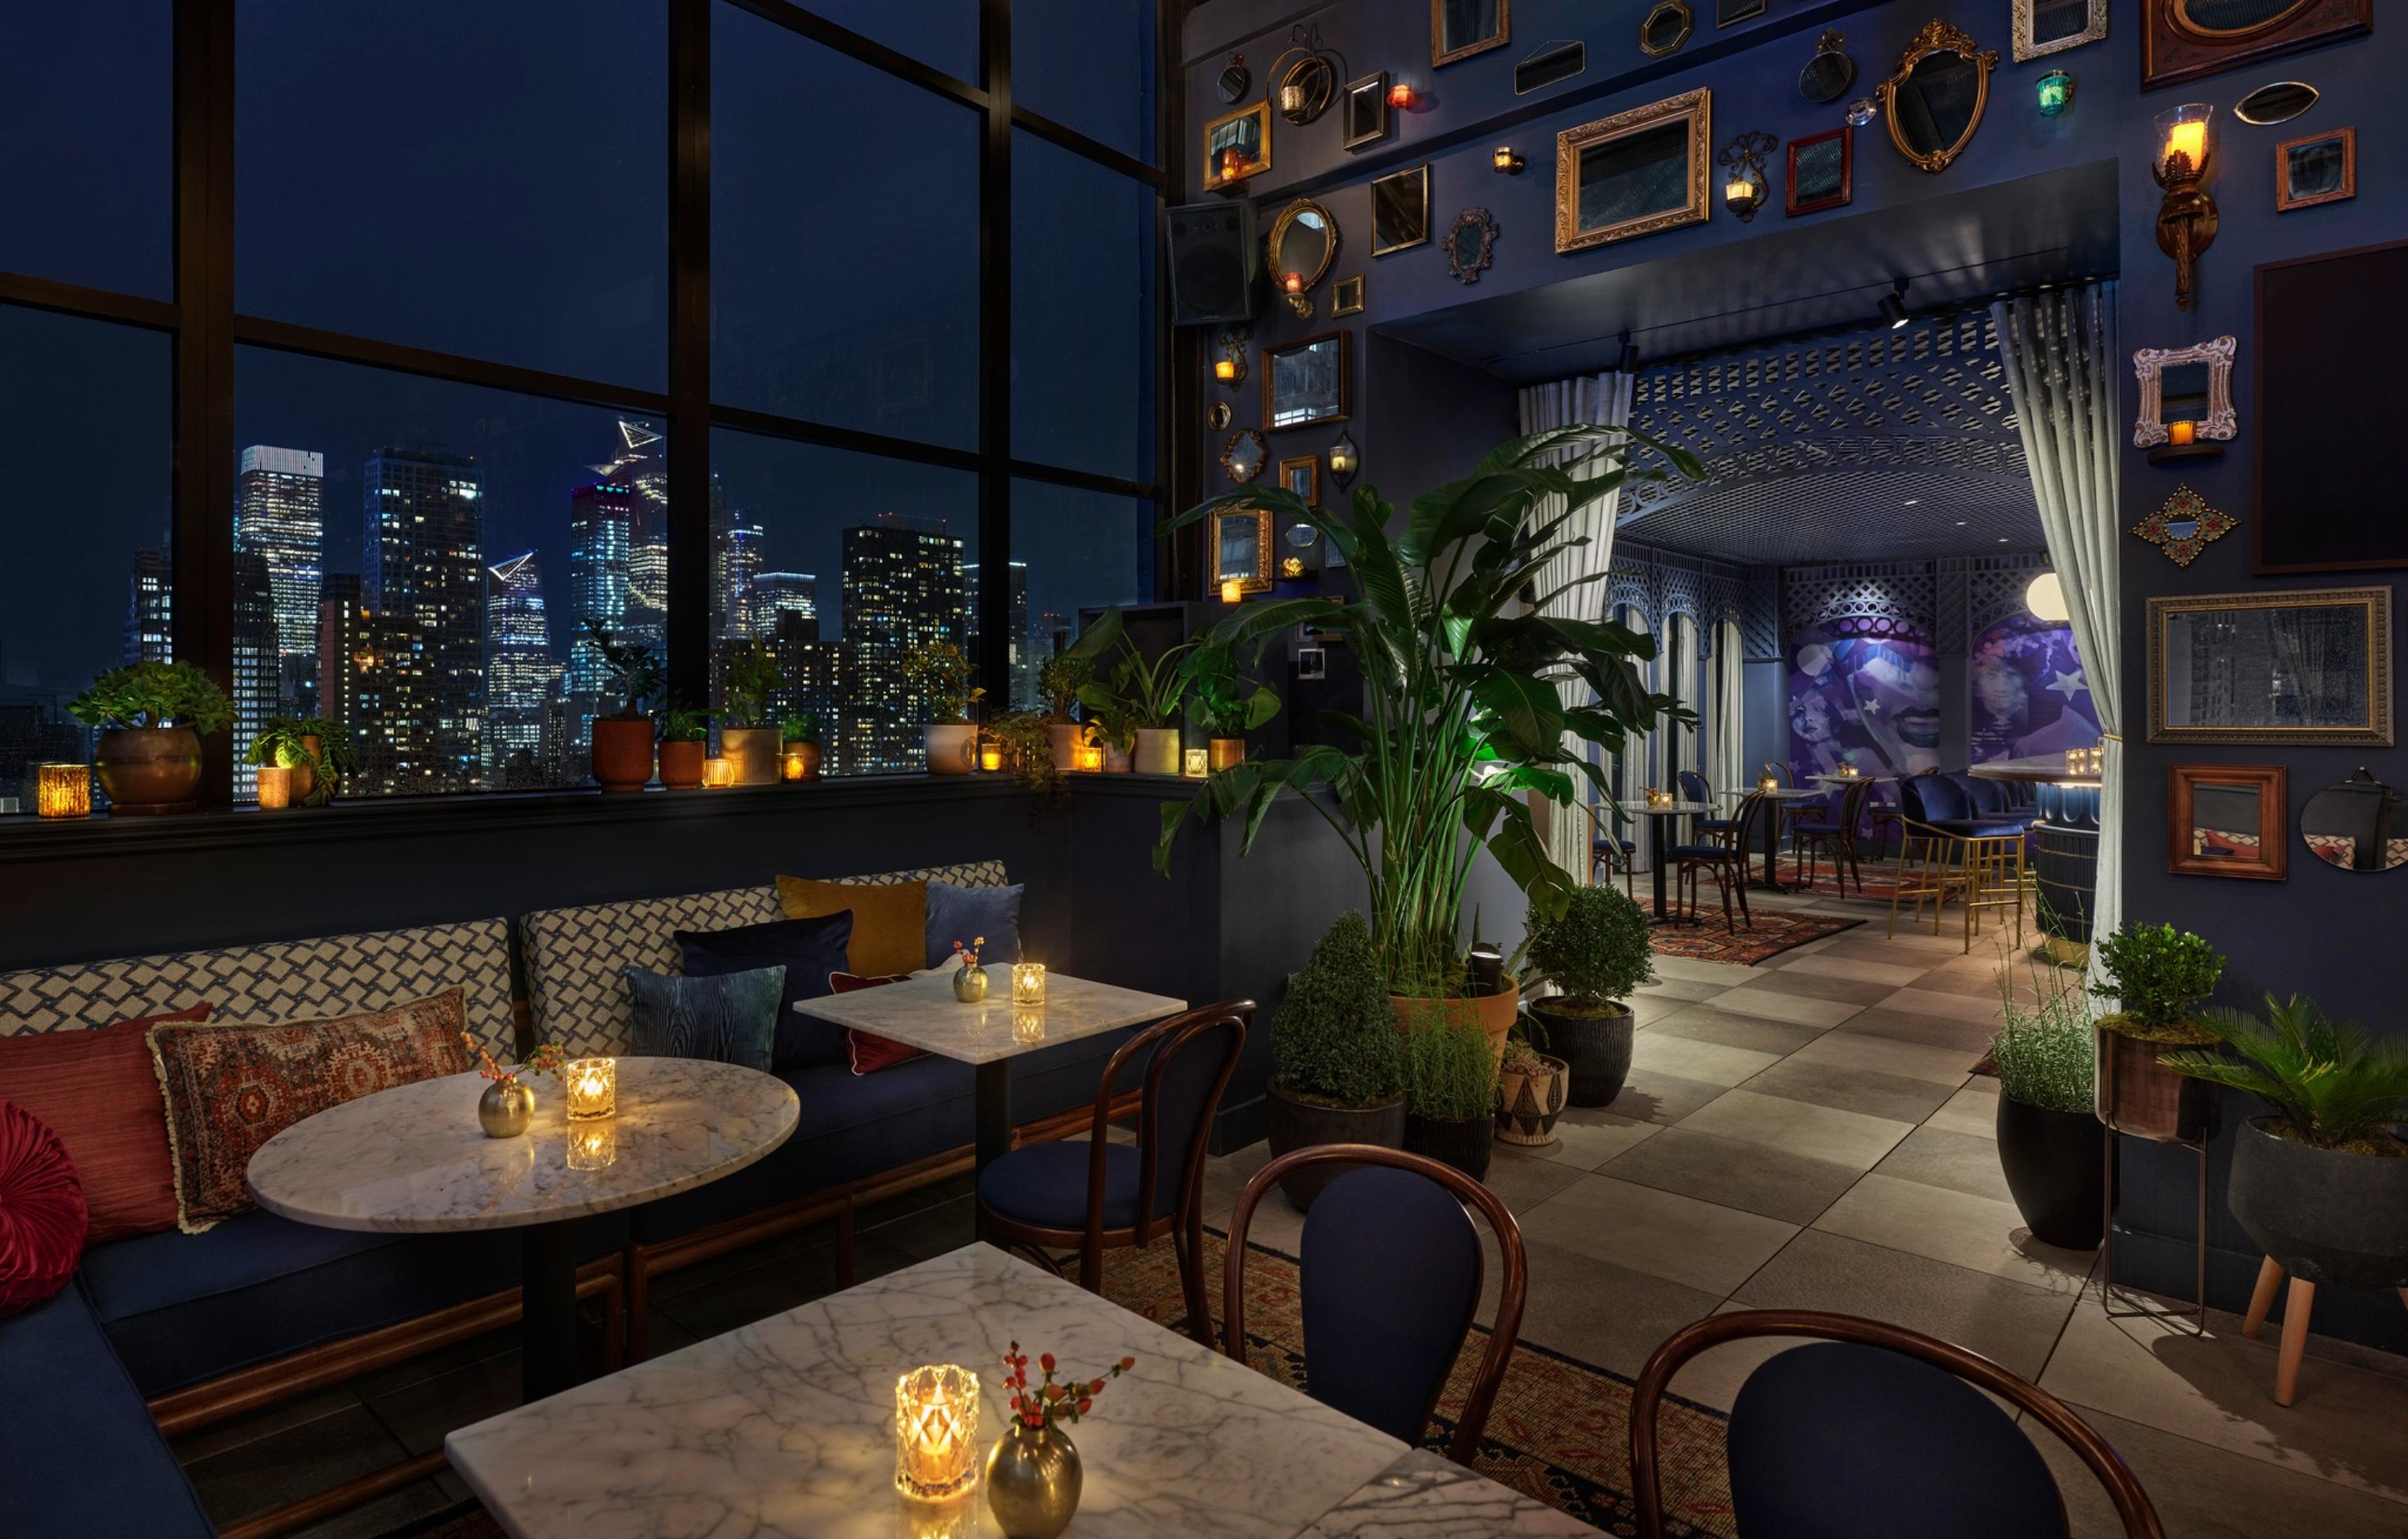 Hottest NY Rooftop Bar The Fleur Room Opens At Moxy Chelsea